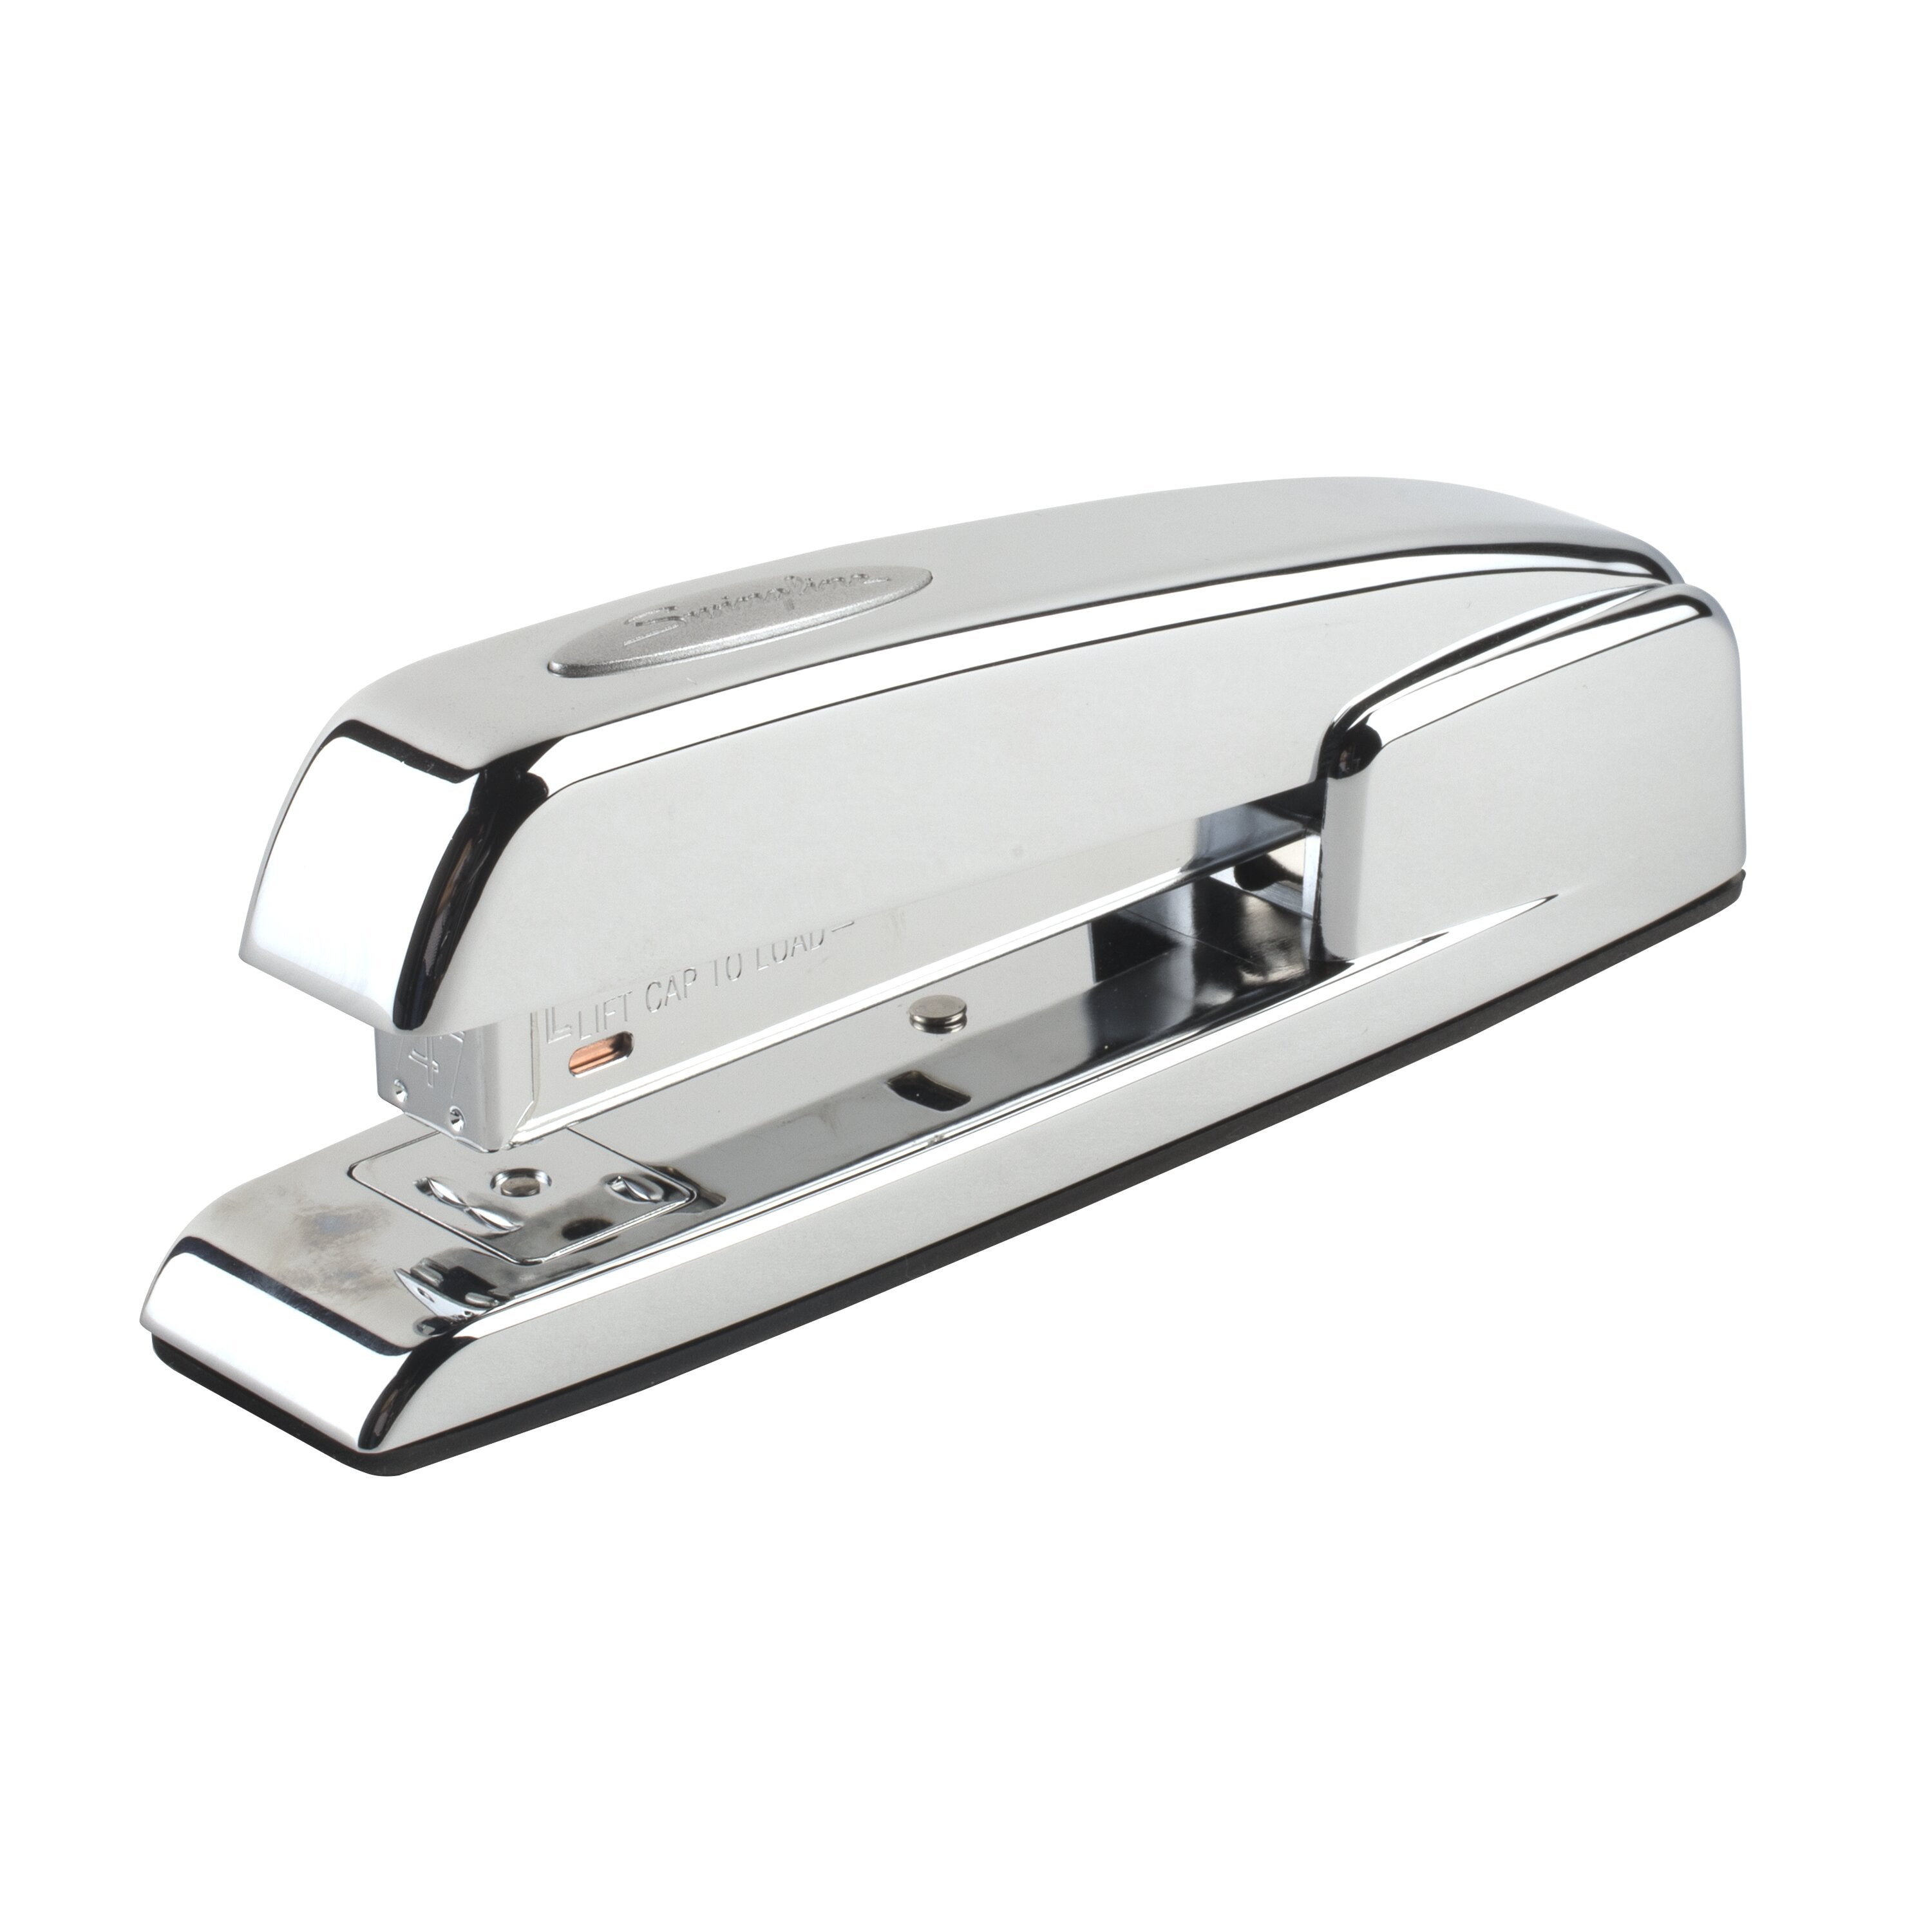 747® Polished Chrome Stapler - Collector's Edition